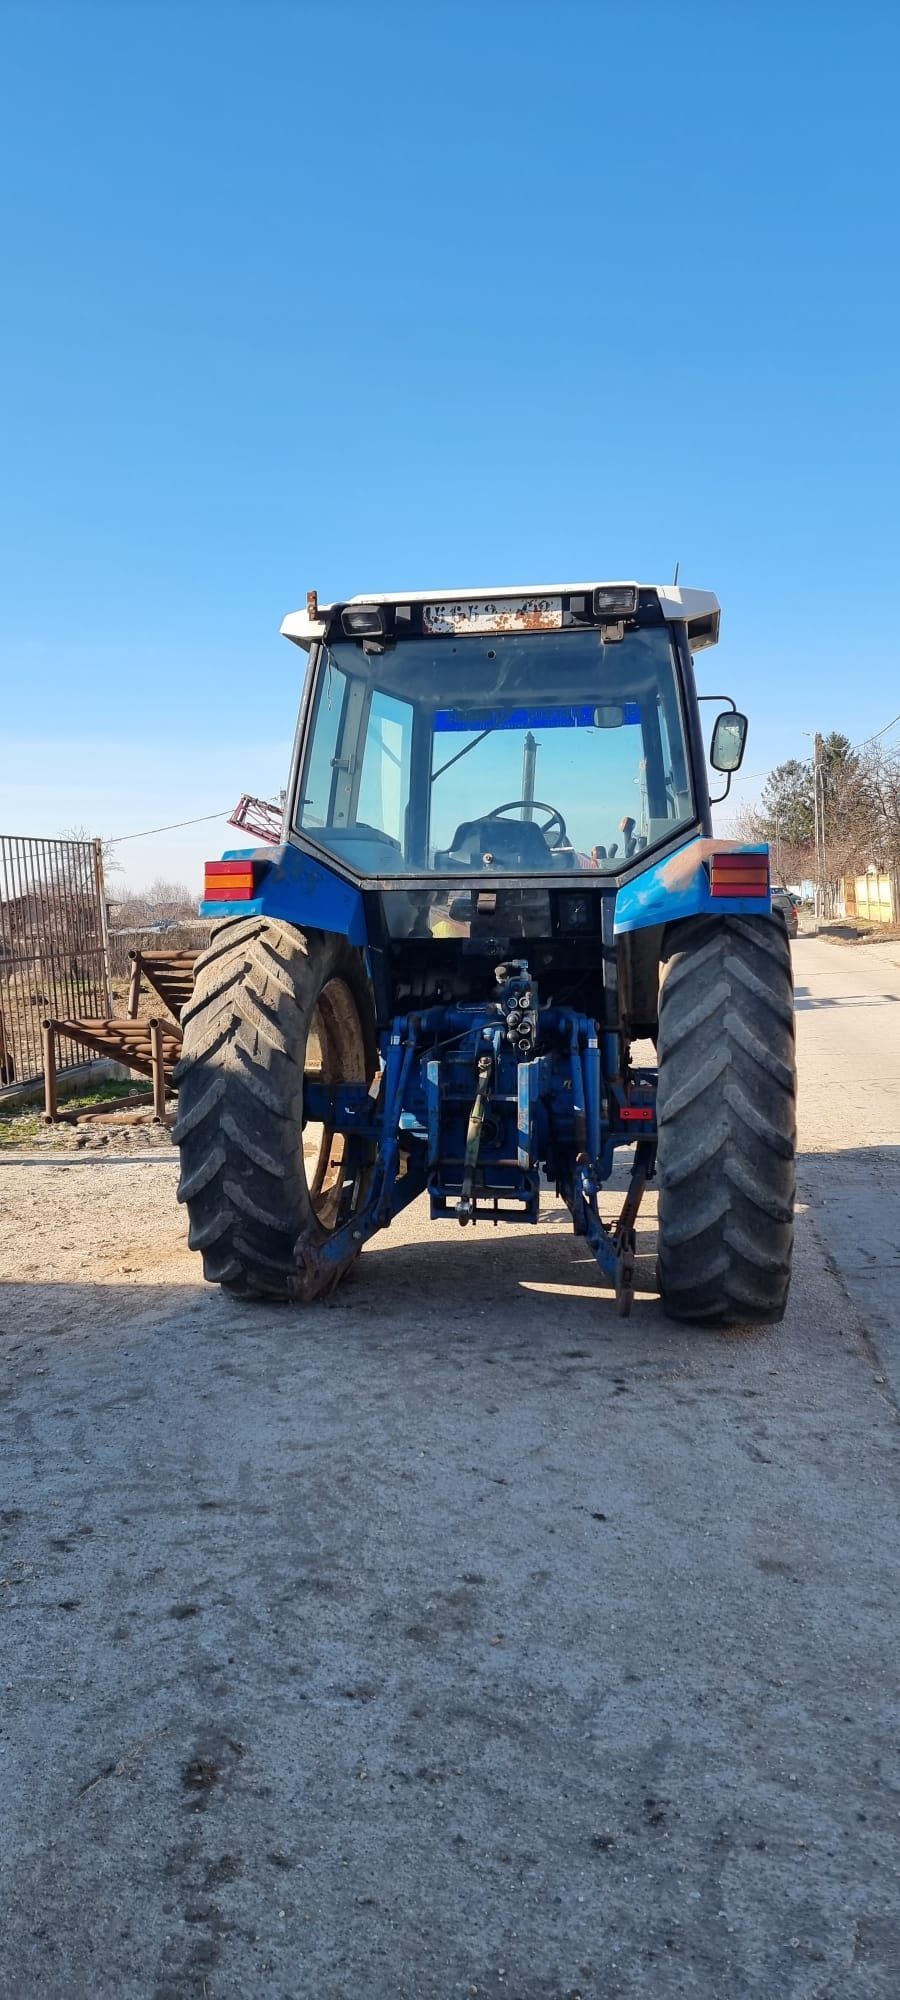 Tractor New holland 7740